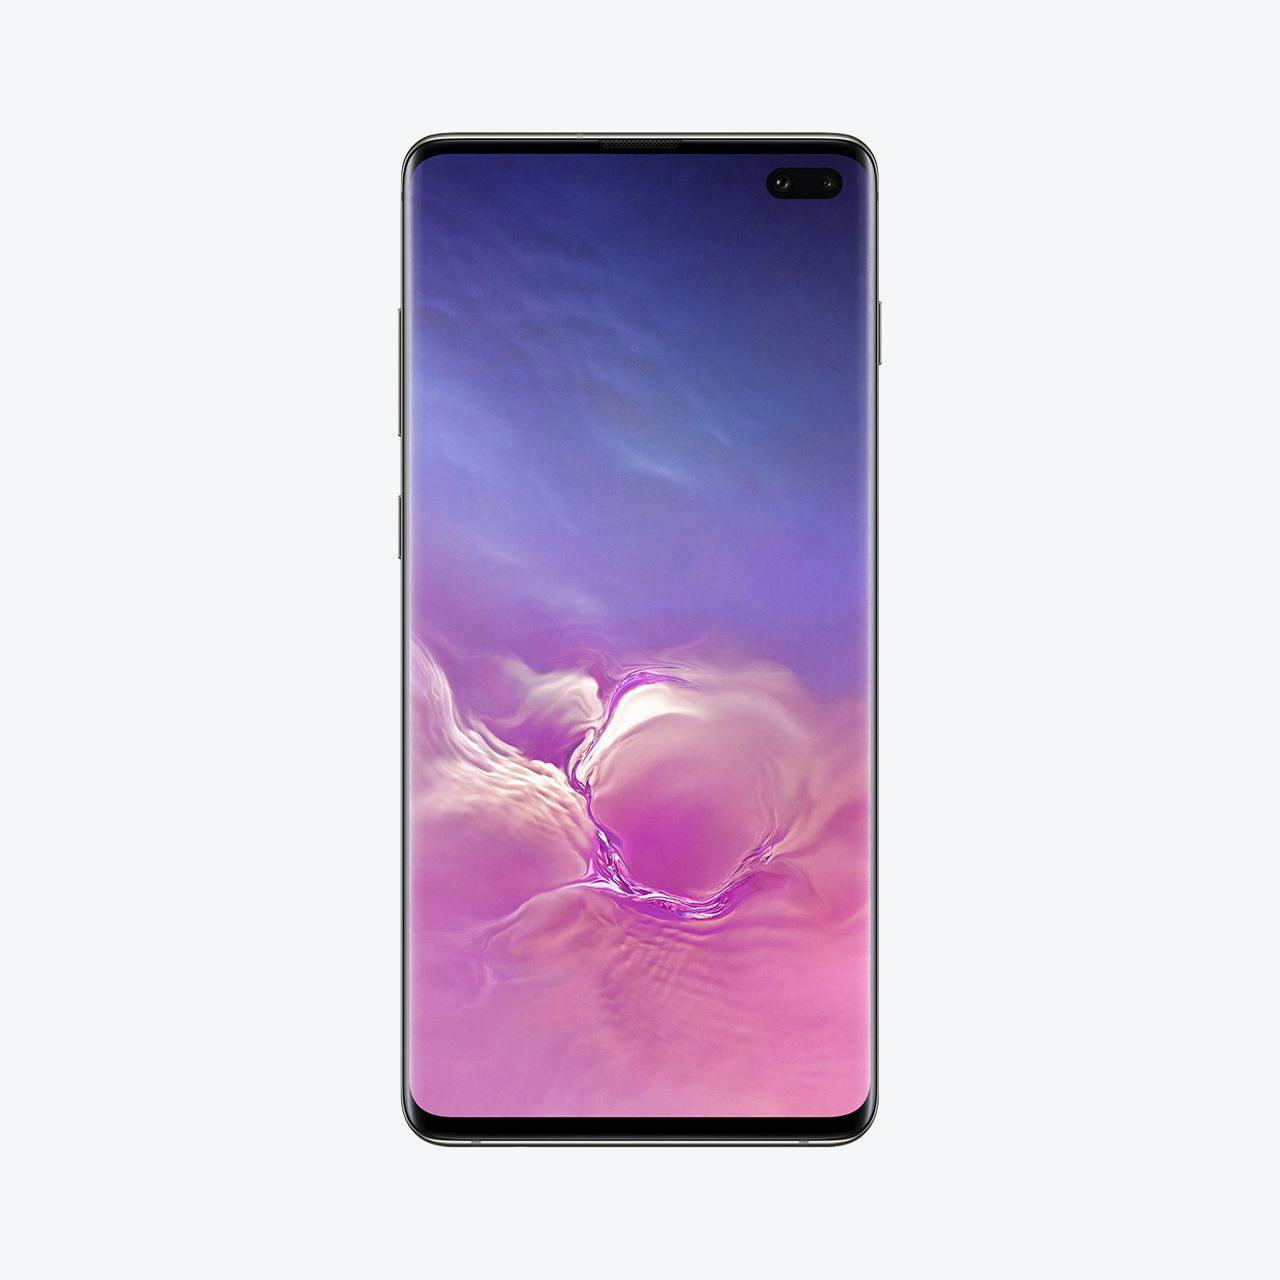 Image of a Samsung Galaxy S10 Plus.